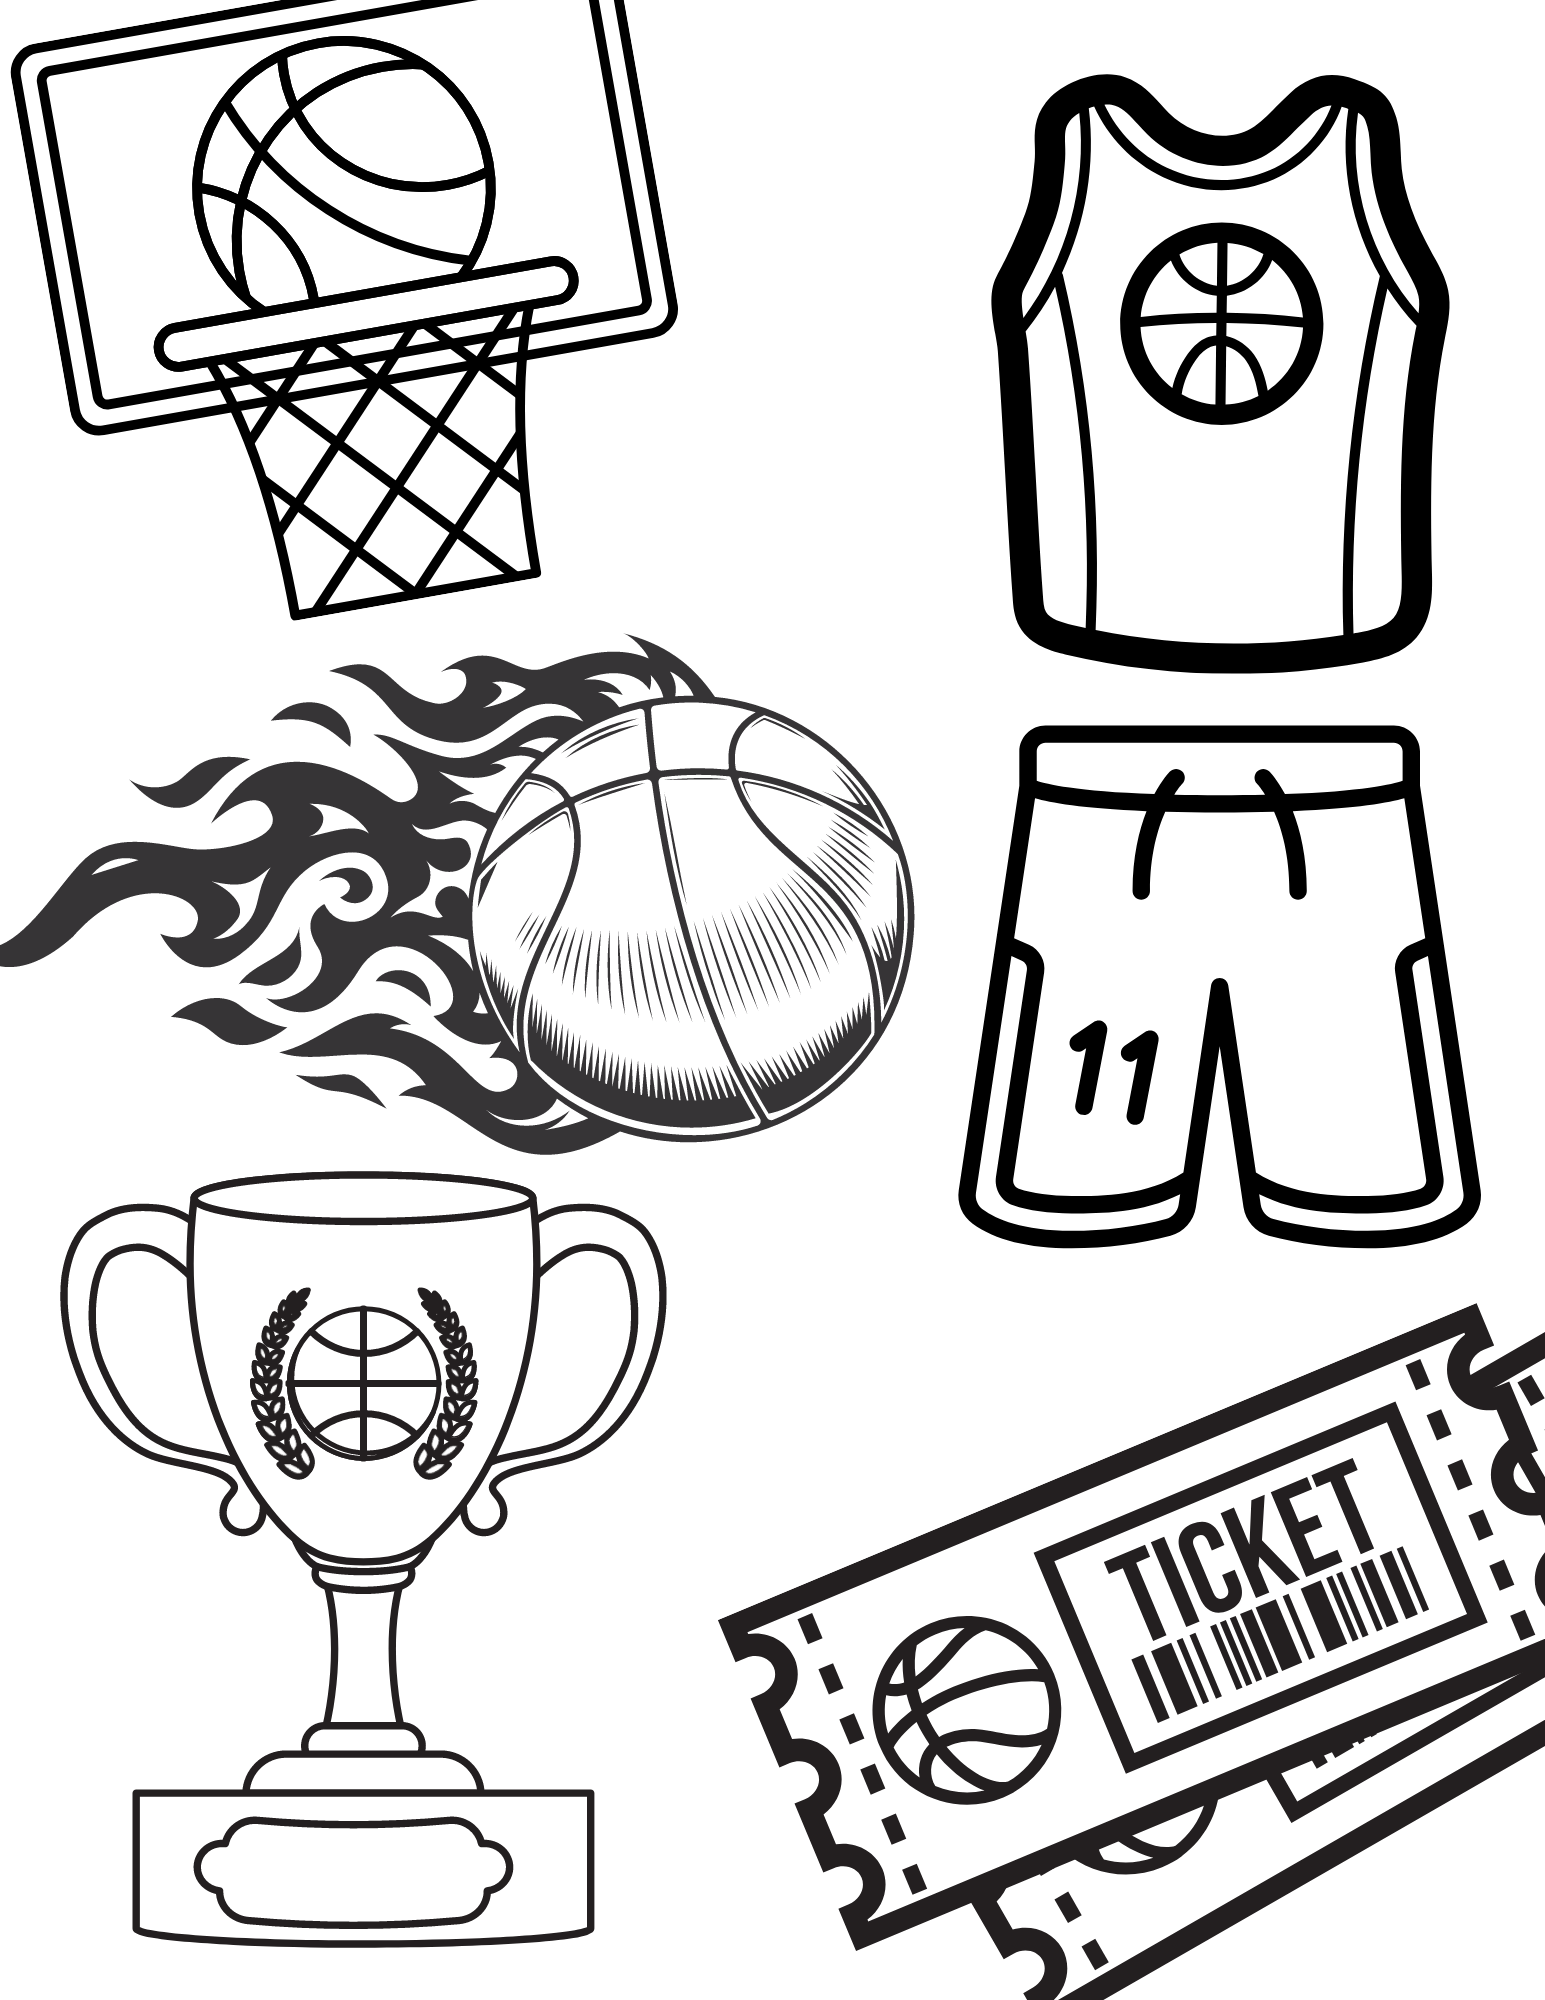 Free Basketball Coloring Pages | FaveCrafts.com